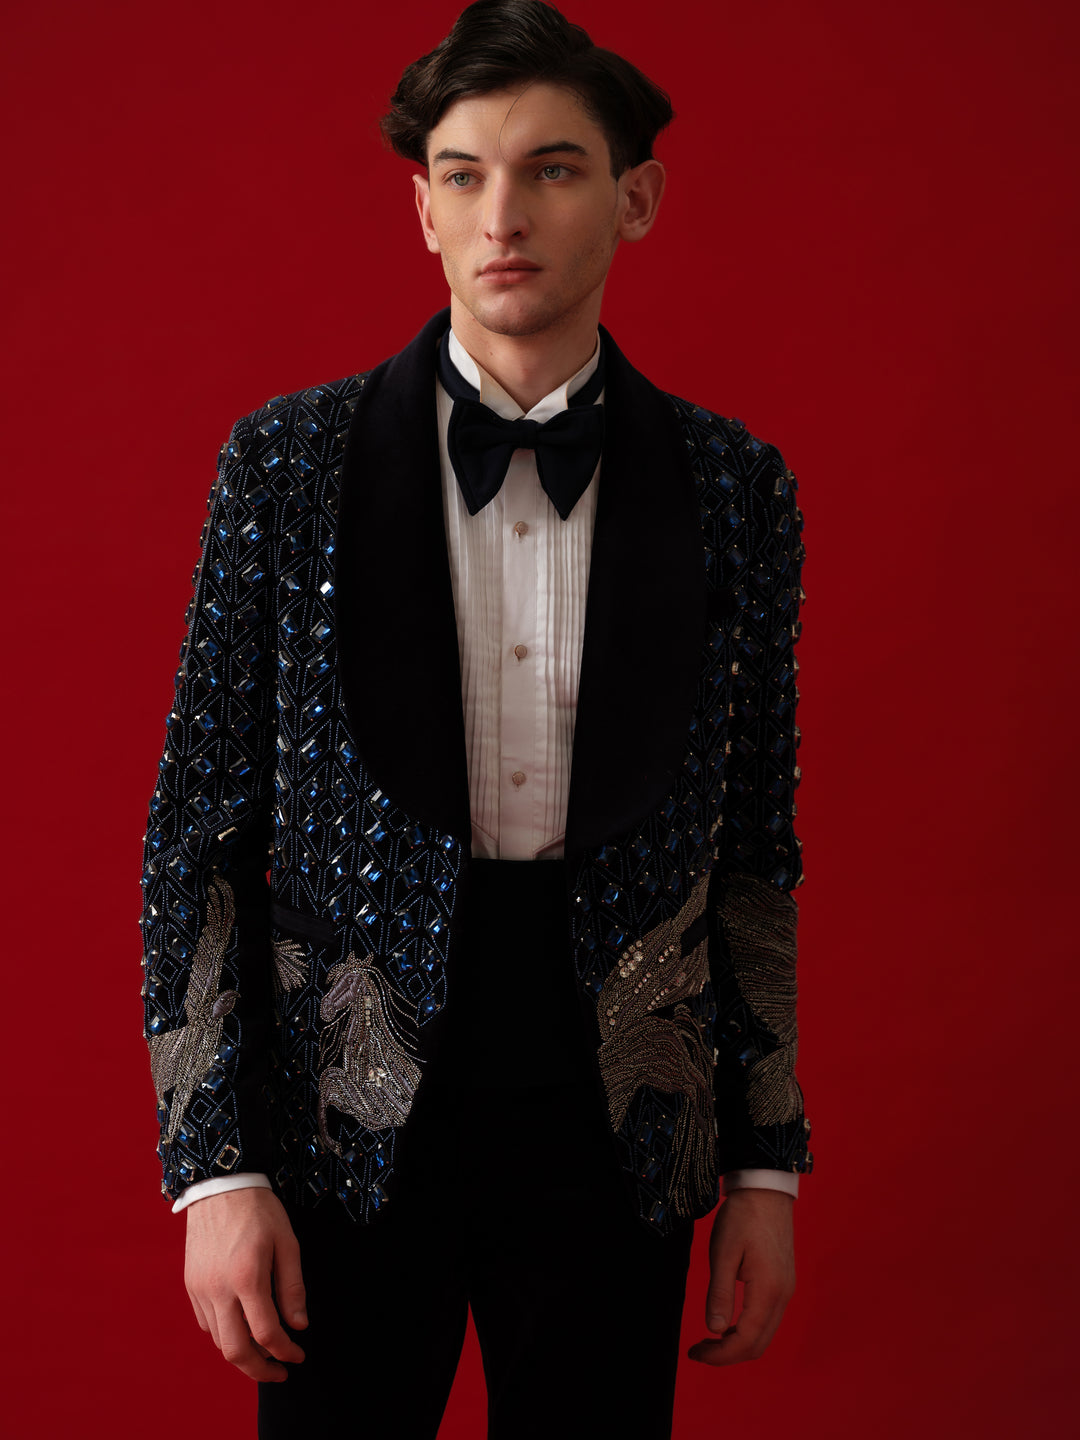 NAVY BLUE EMBROIDERED TUXEDO WITH SHAWL LAPEL